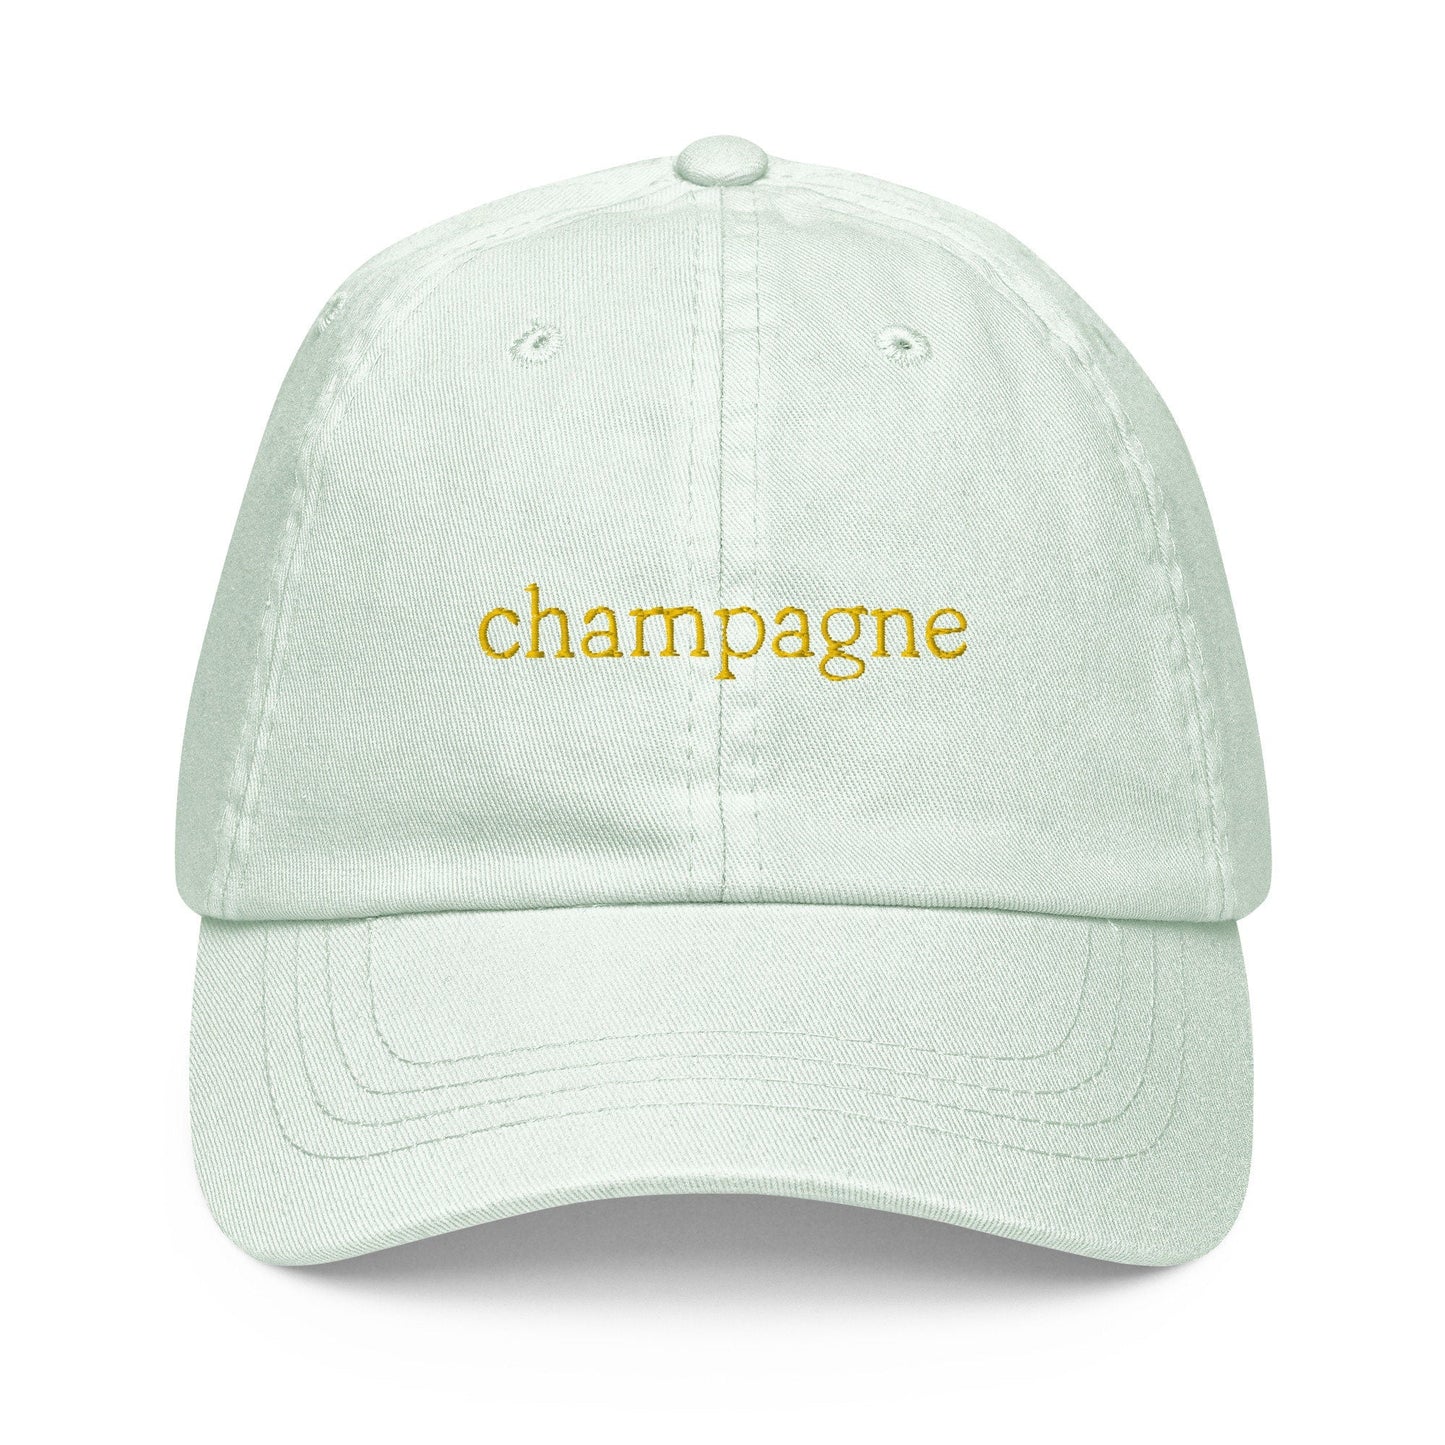 Champagne Dad Hat - Gift for French Wine Lovers - Pastel Cotton Embroidered Cap - Evilwater Originals